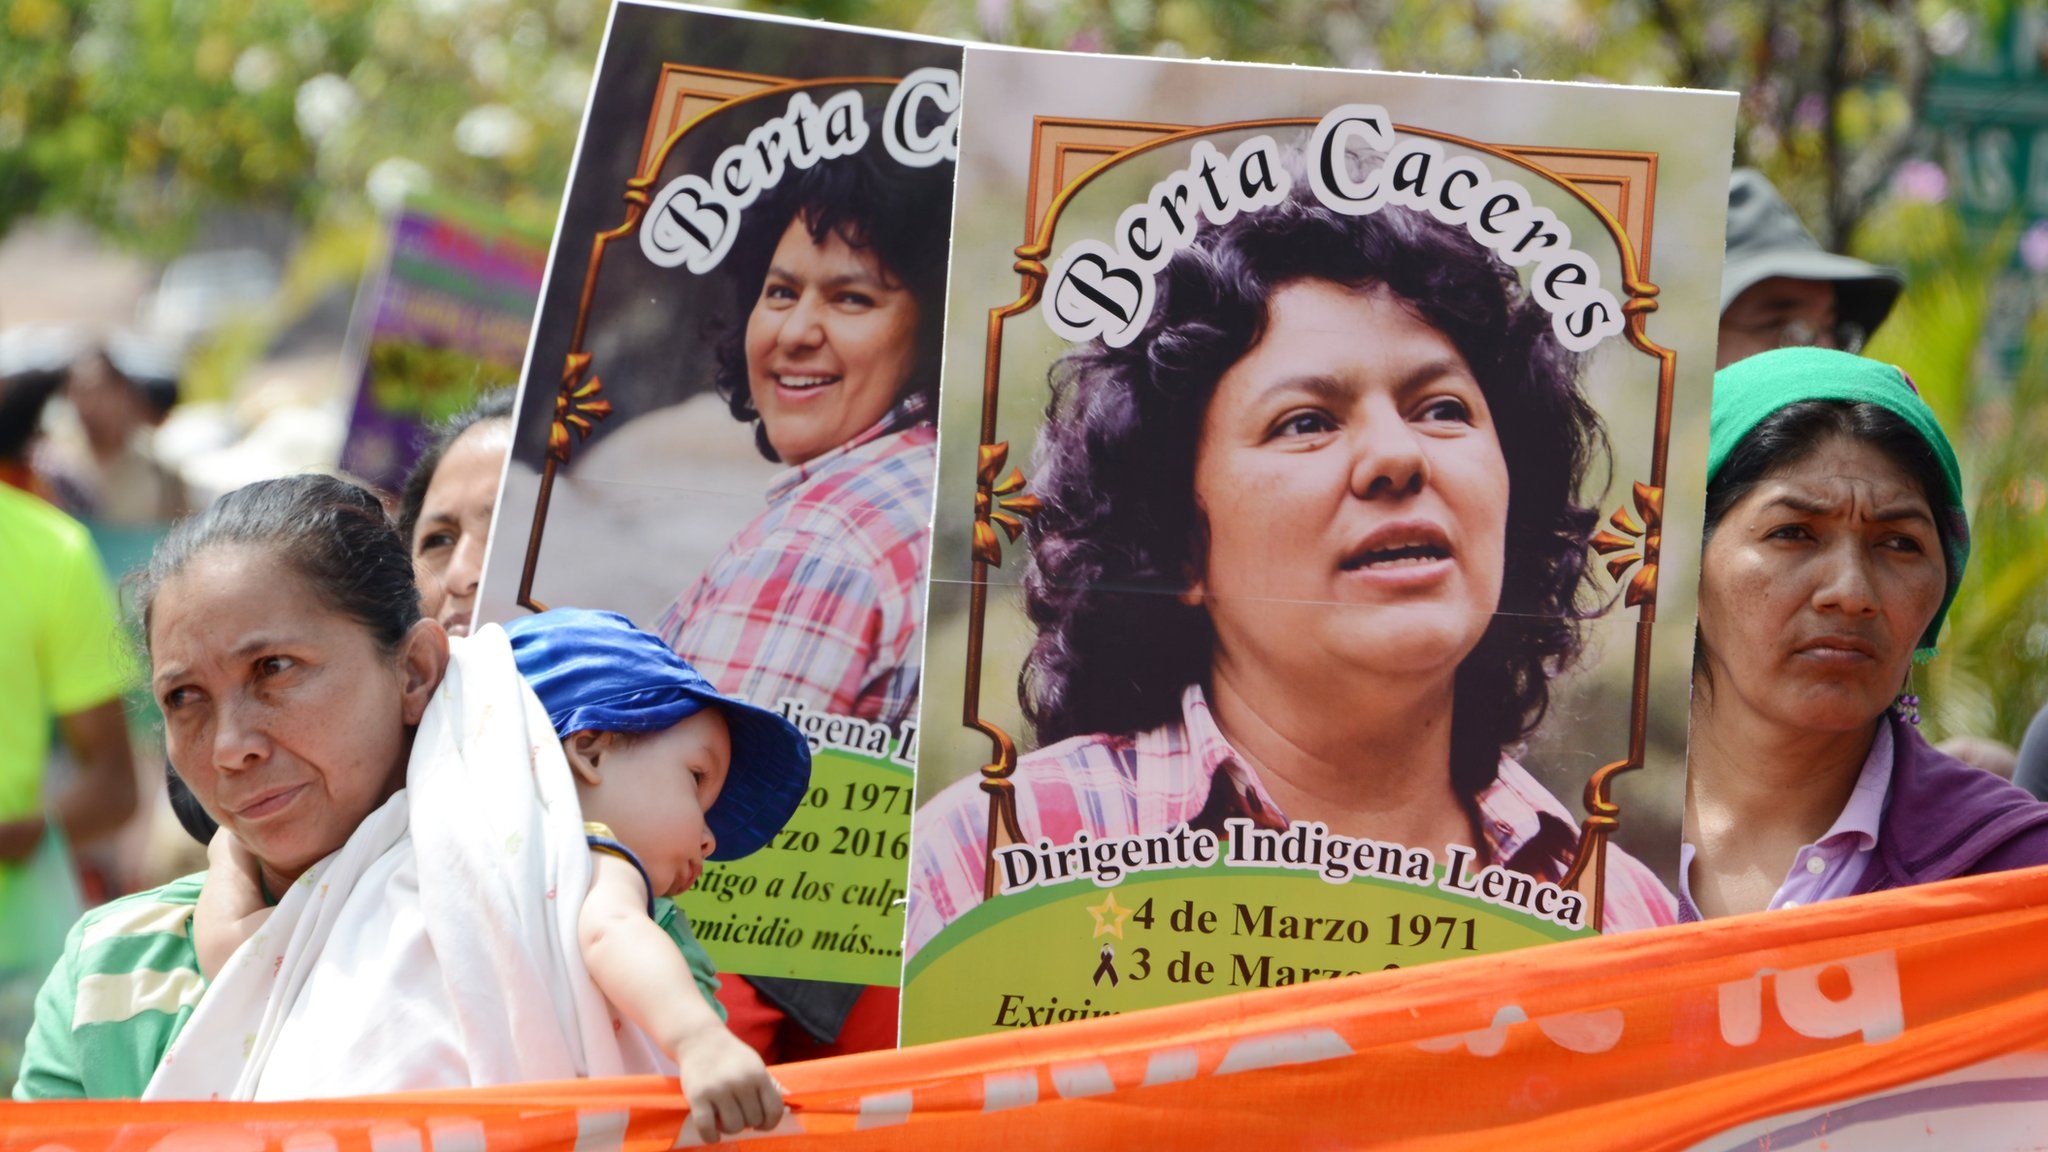 Berta Caceres posters are carried during a International Women's day demonstration in Tegucigalpa on March 08, 2016